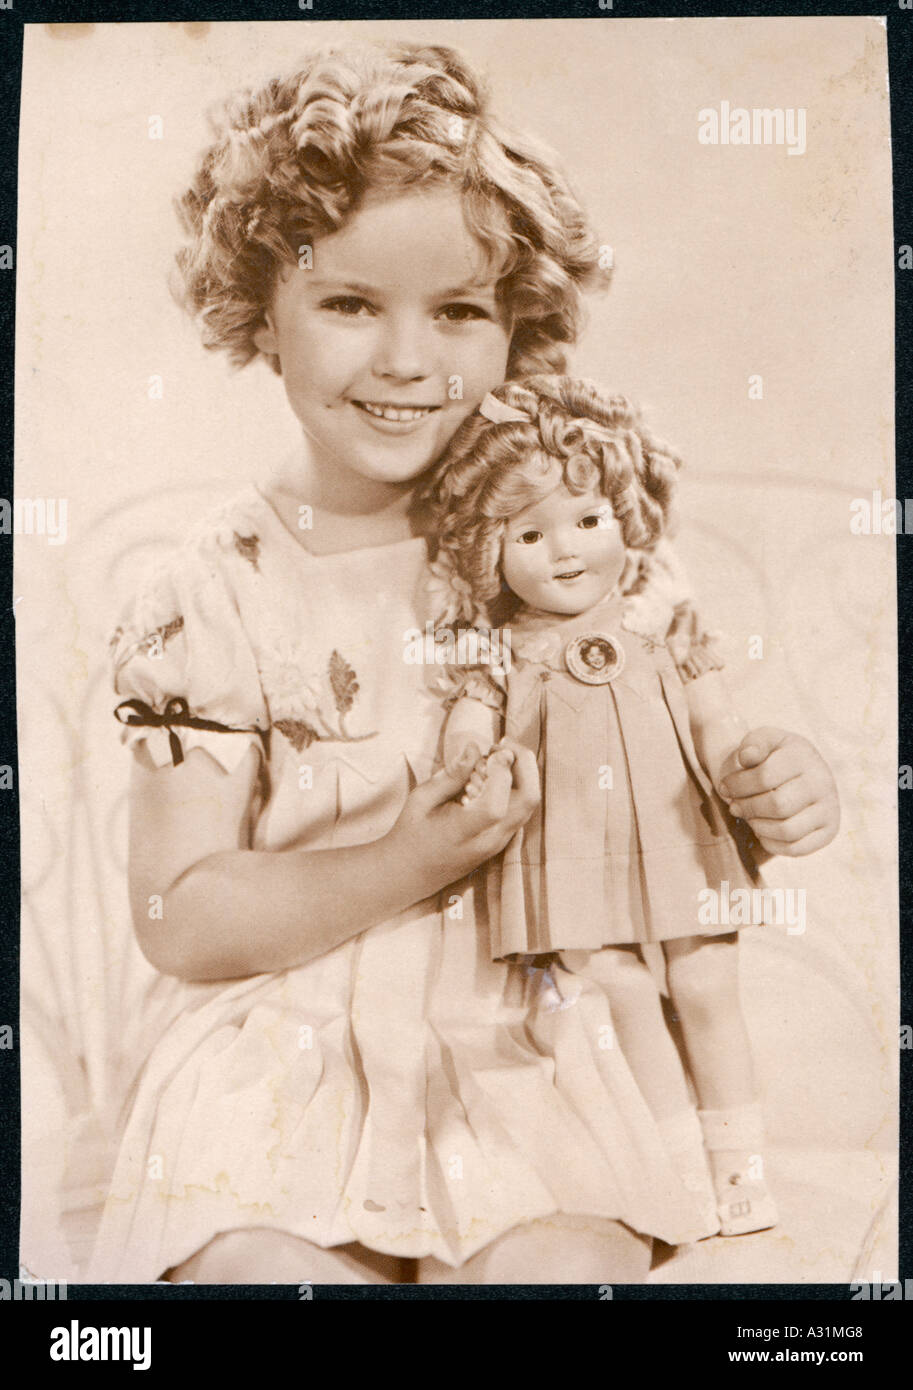 1935 shirley temple doll